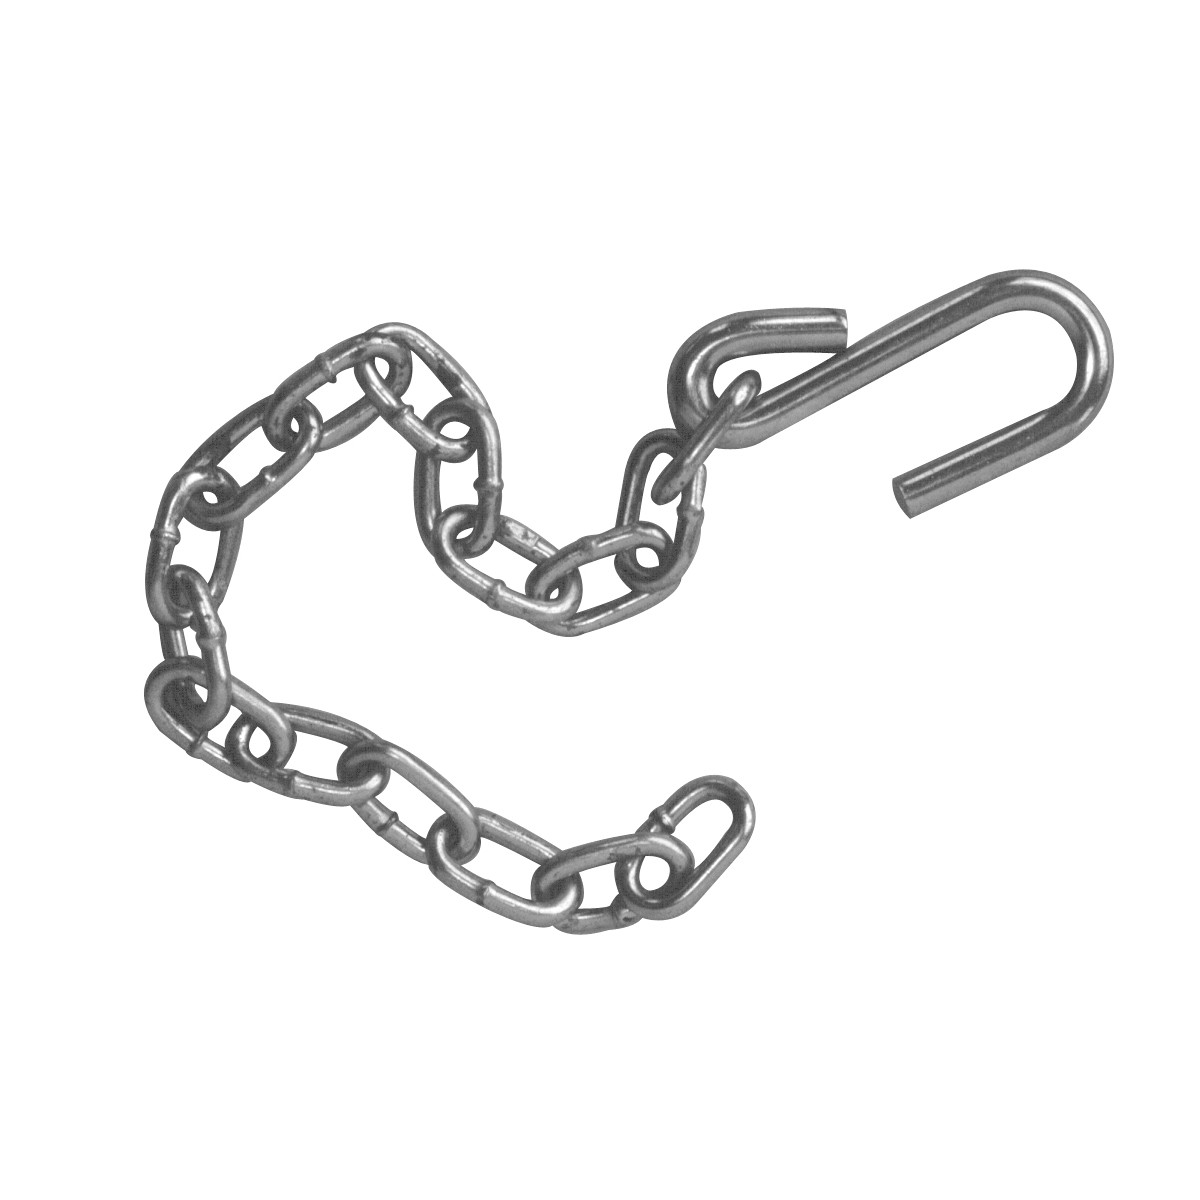 Tie Down Marine Bow Safety Chain (Carton of 12)